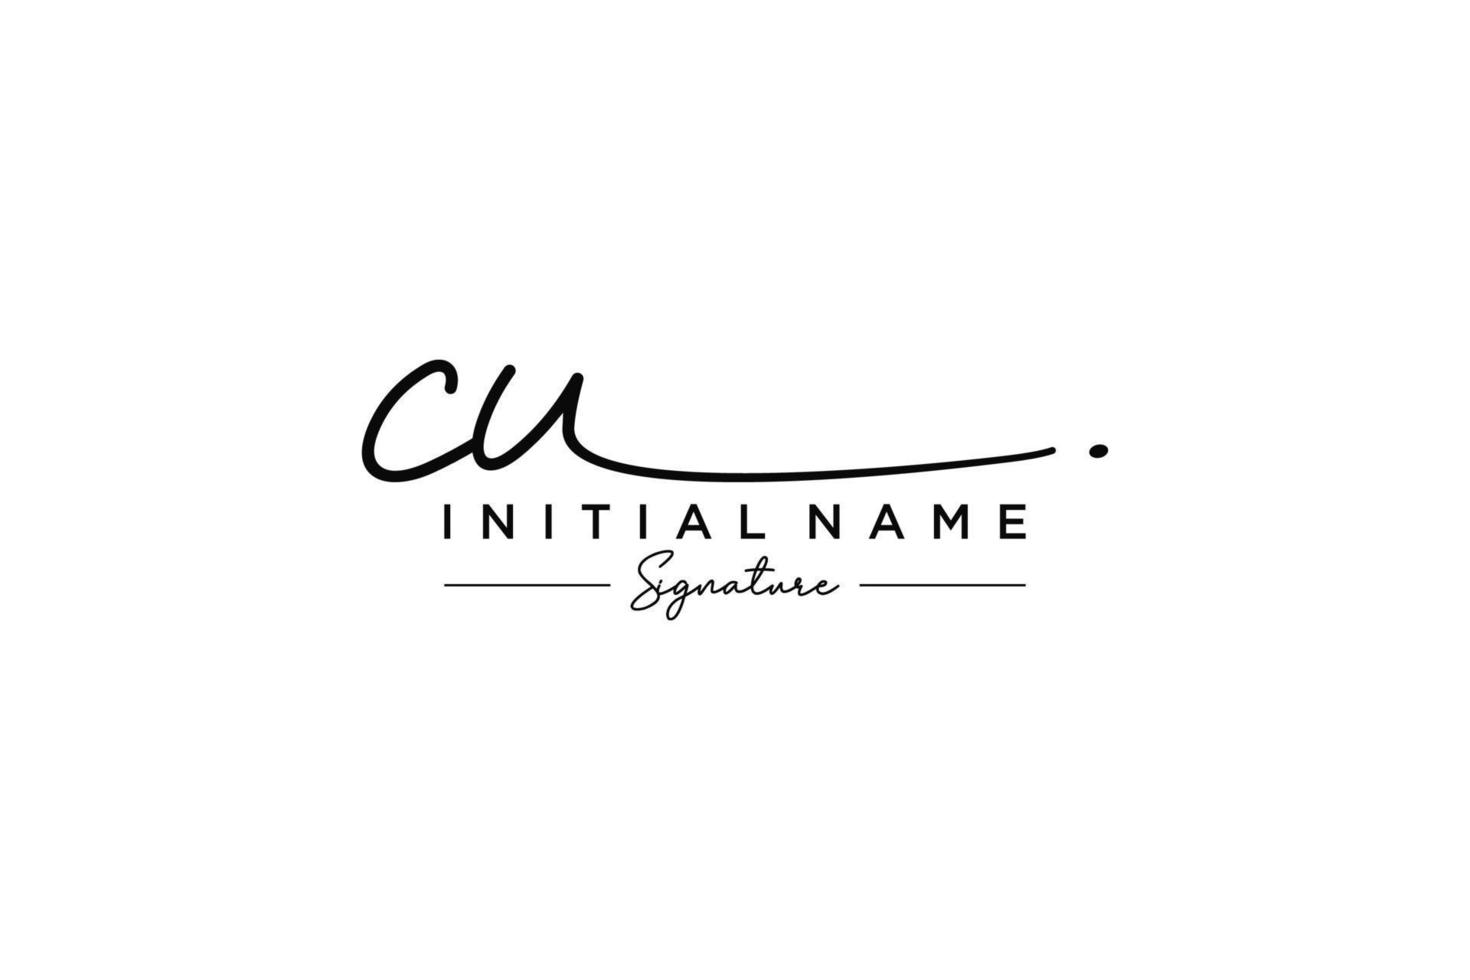 Initial CU signature logo template vector. Hand drawn Calligraphy lettering Vector illustration.